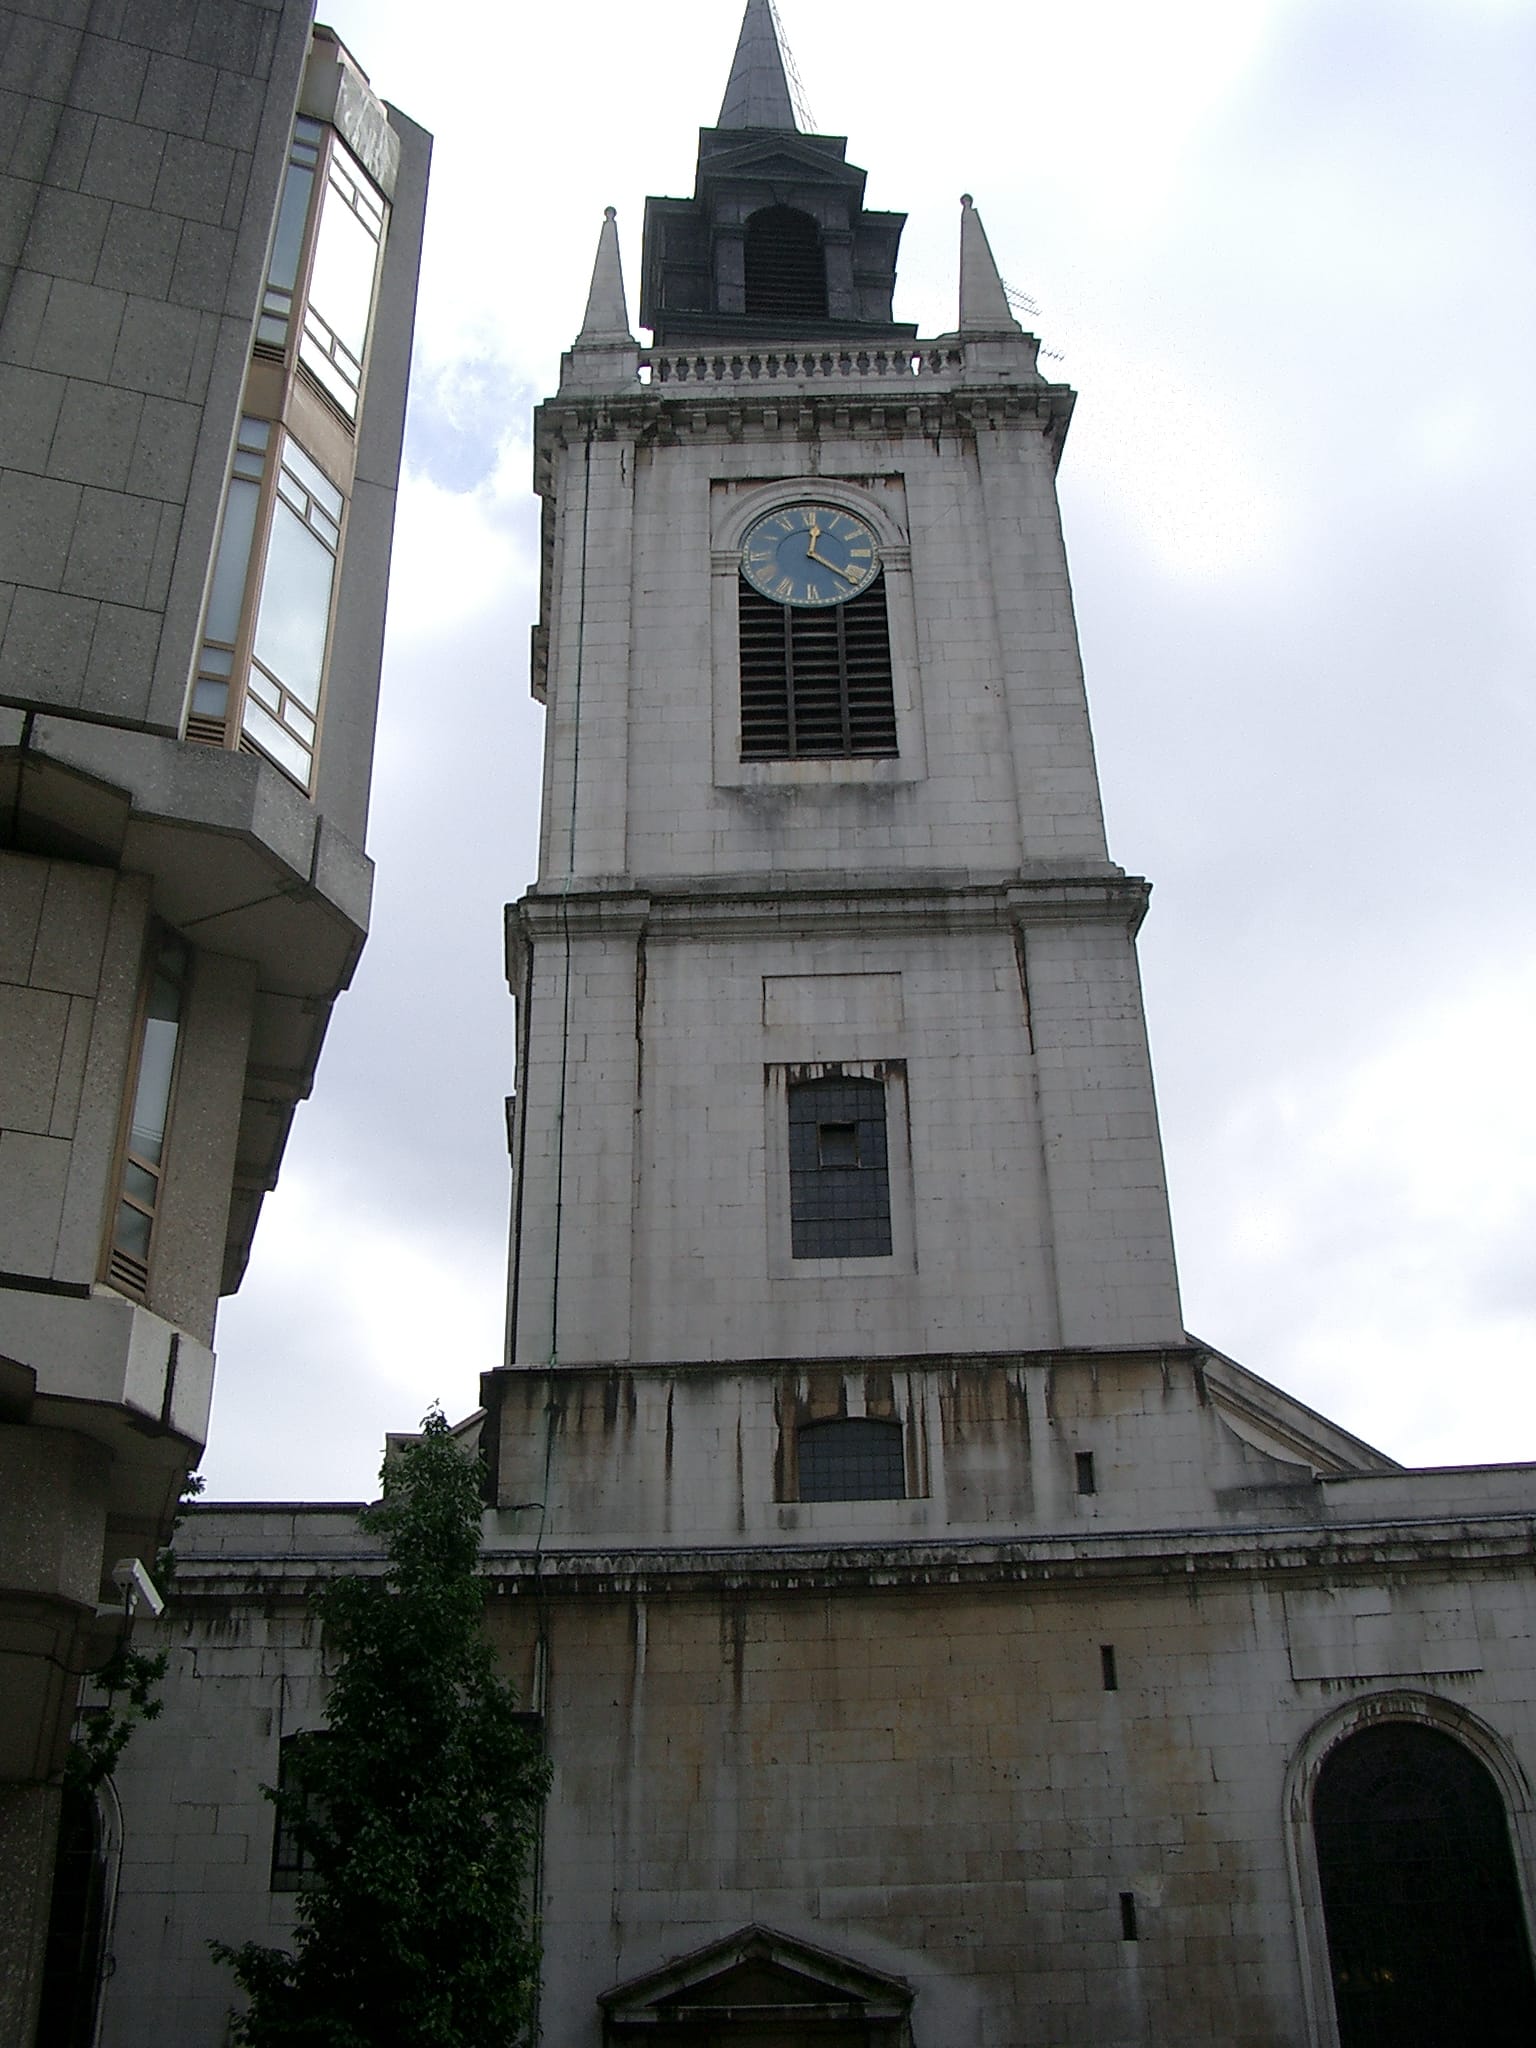 St. Lawrence Jewry Bell Tower, London, England ©2006 GRevelstoke